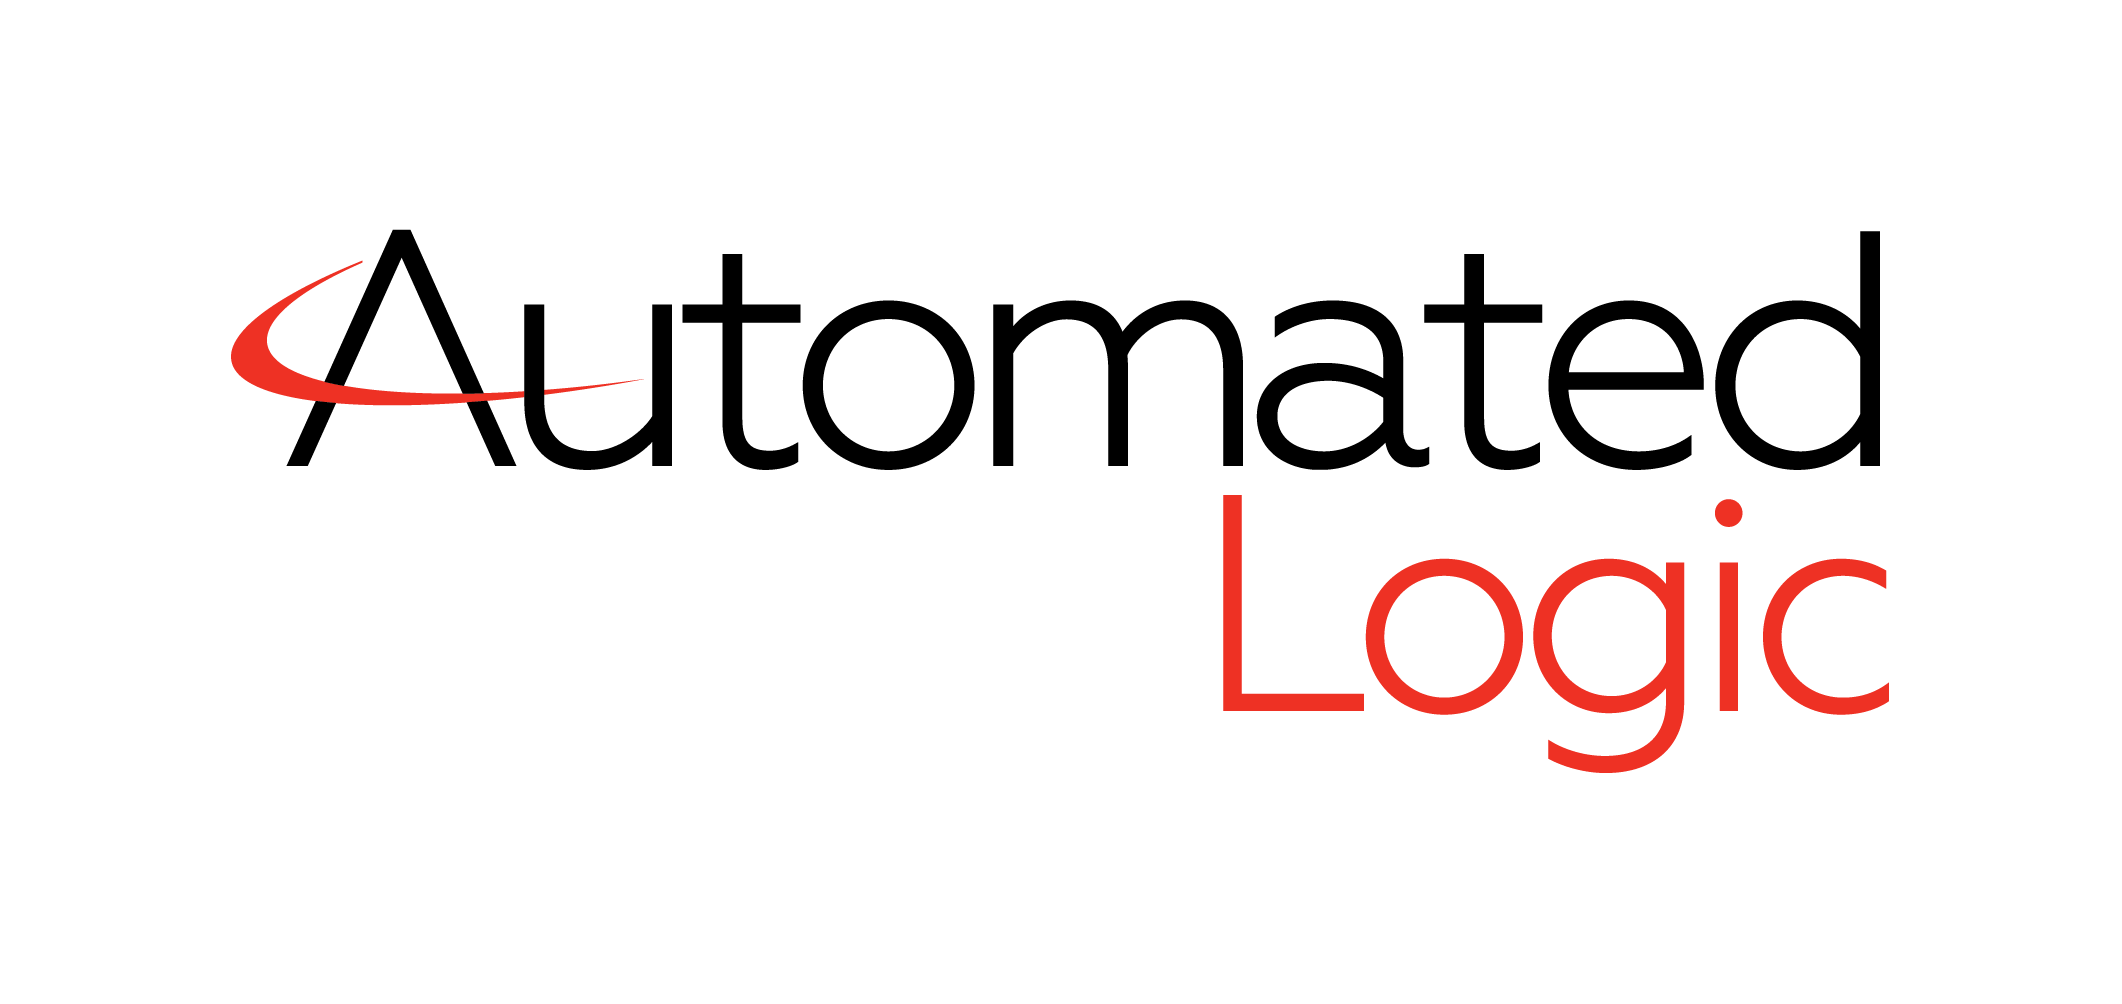 Automatic Controls is an Authorized Dealer of Automated Logic